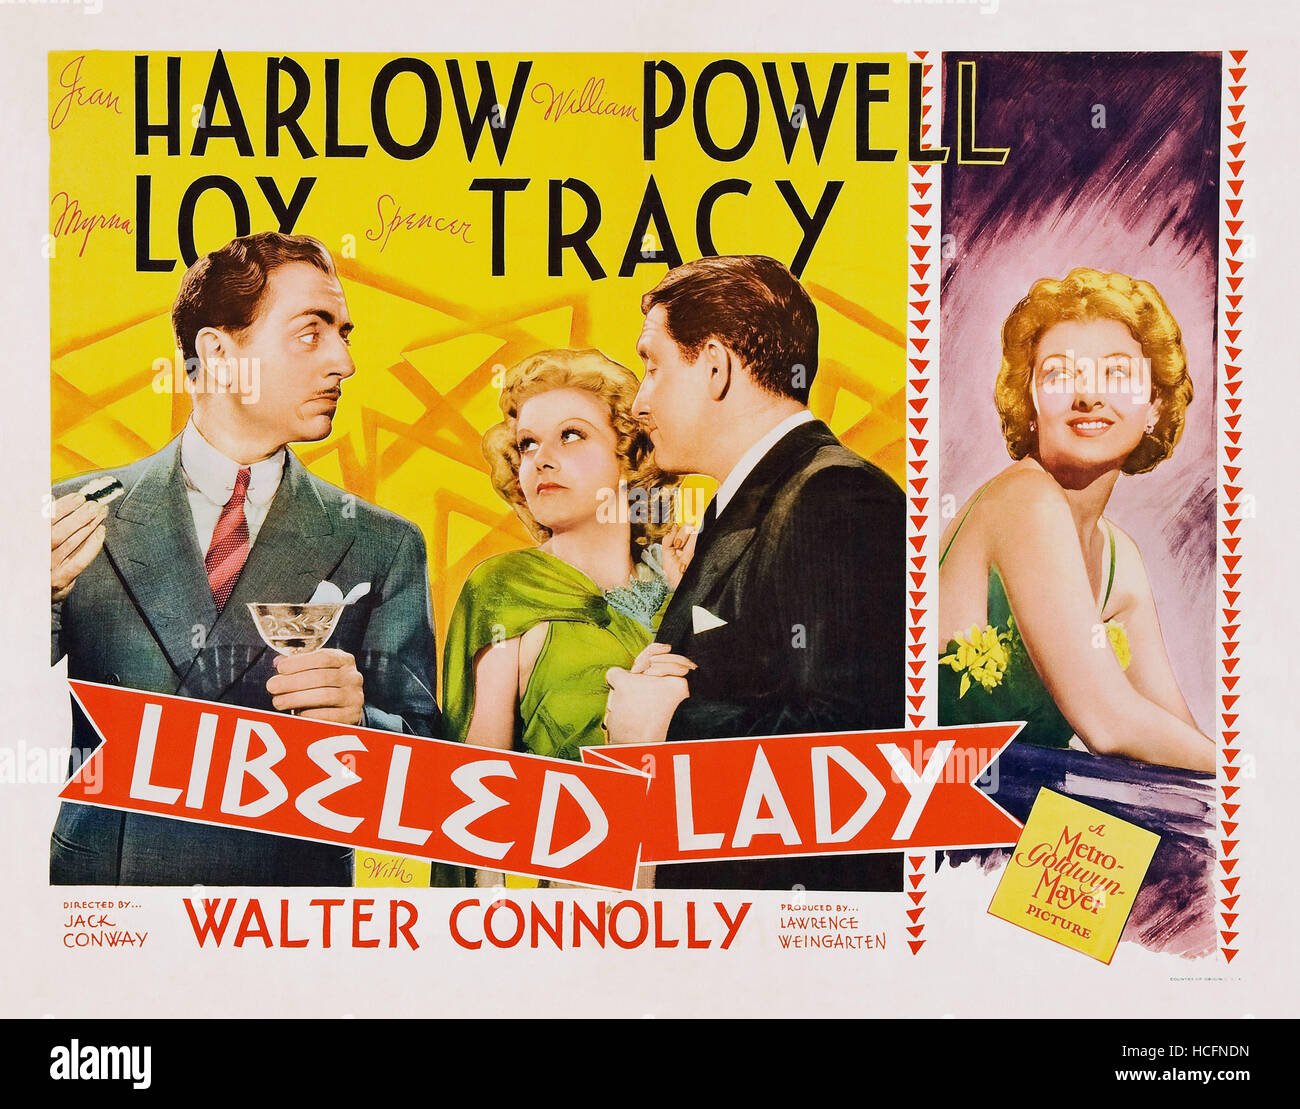 LIBELED LADY, l-r: William Powell, Jean Harlow, Spencer Tracy, far right: Jean Harlow on title card, 1936 Stock Photo